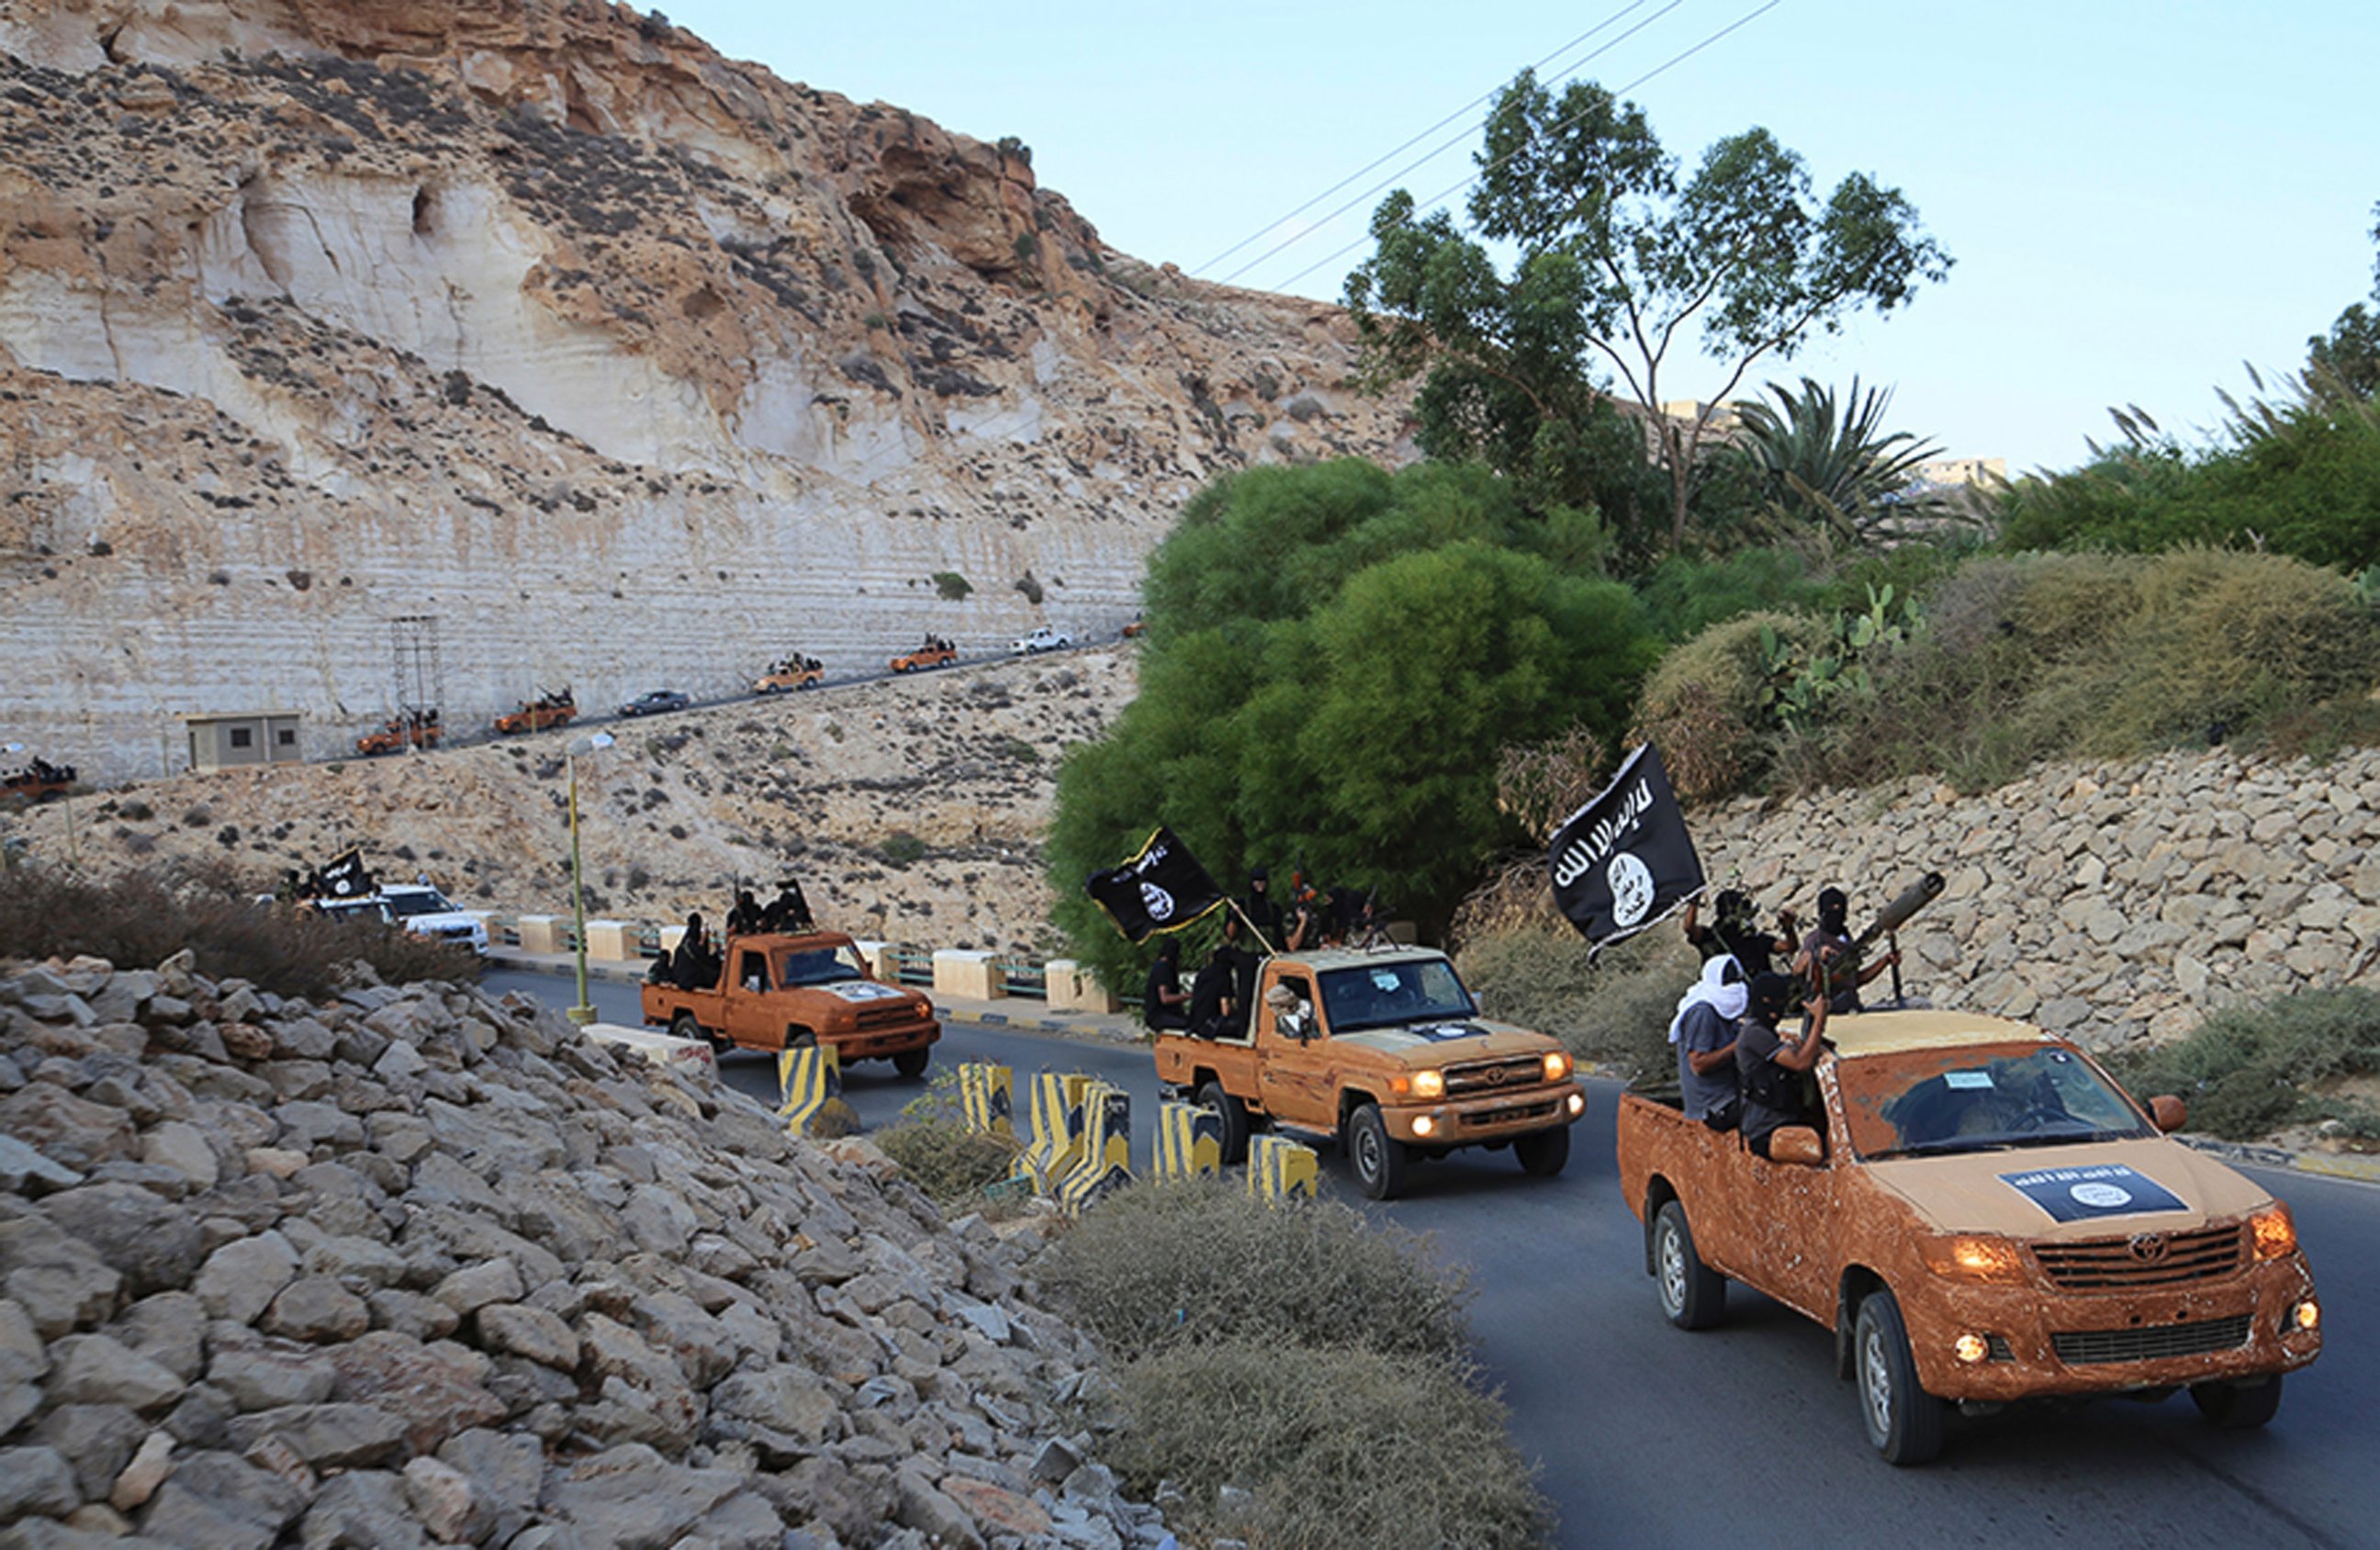 PHOTO: An armed motorcade belonging to members of Derna's Islamic Youth Council drives along a road in Derna in eastern Libya on Oct. 3, 2014.